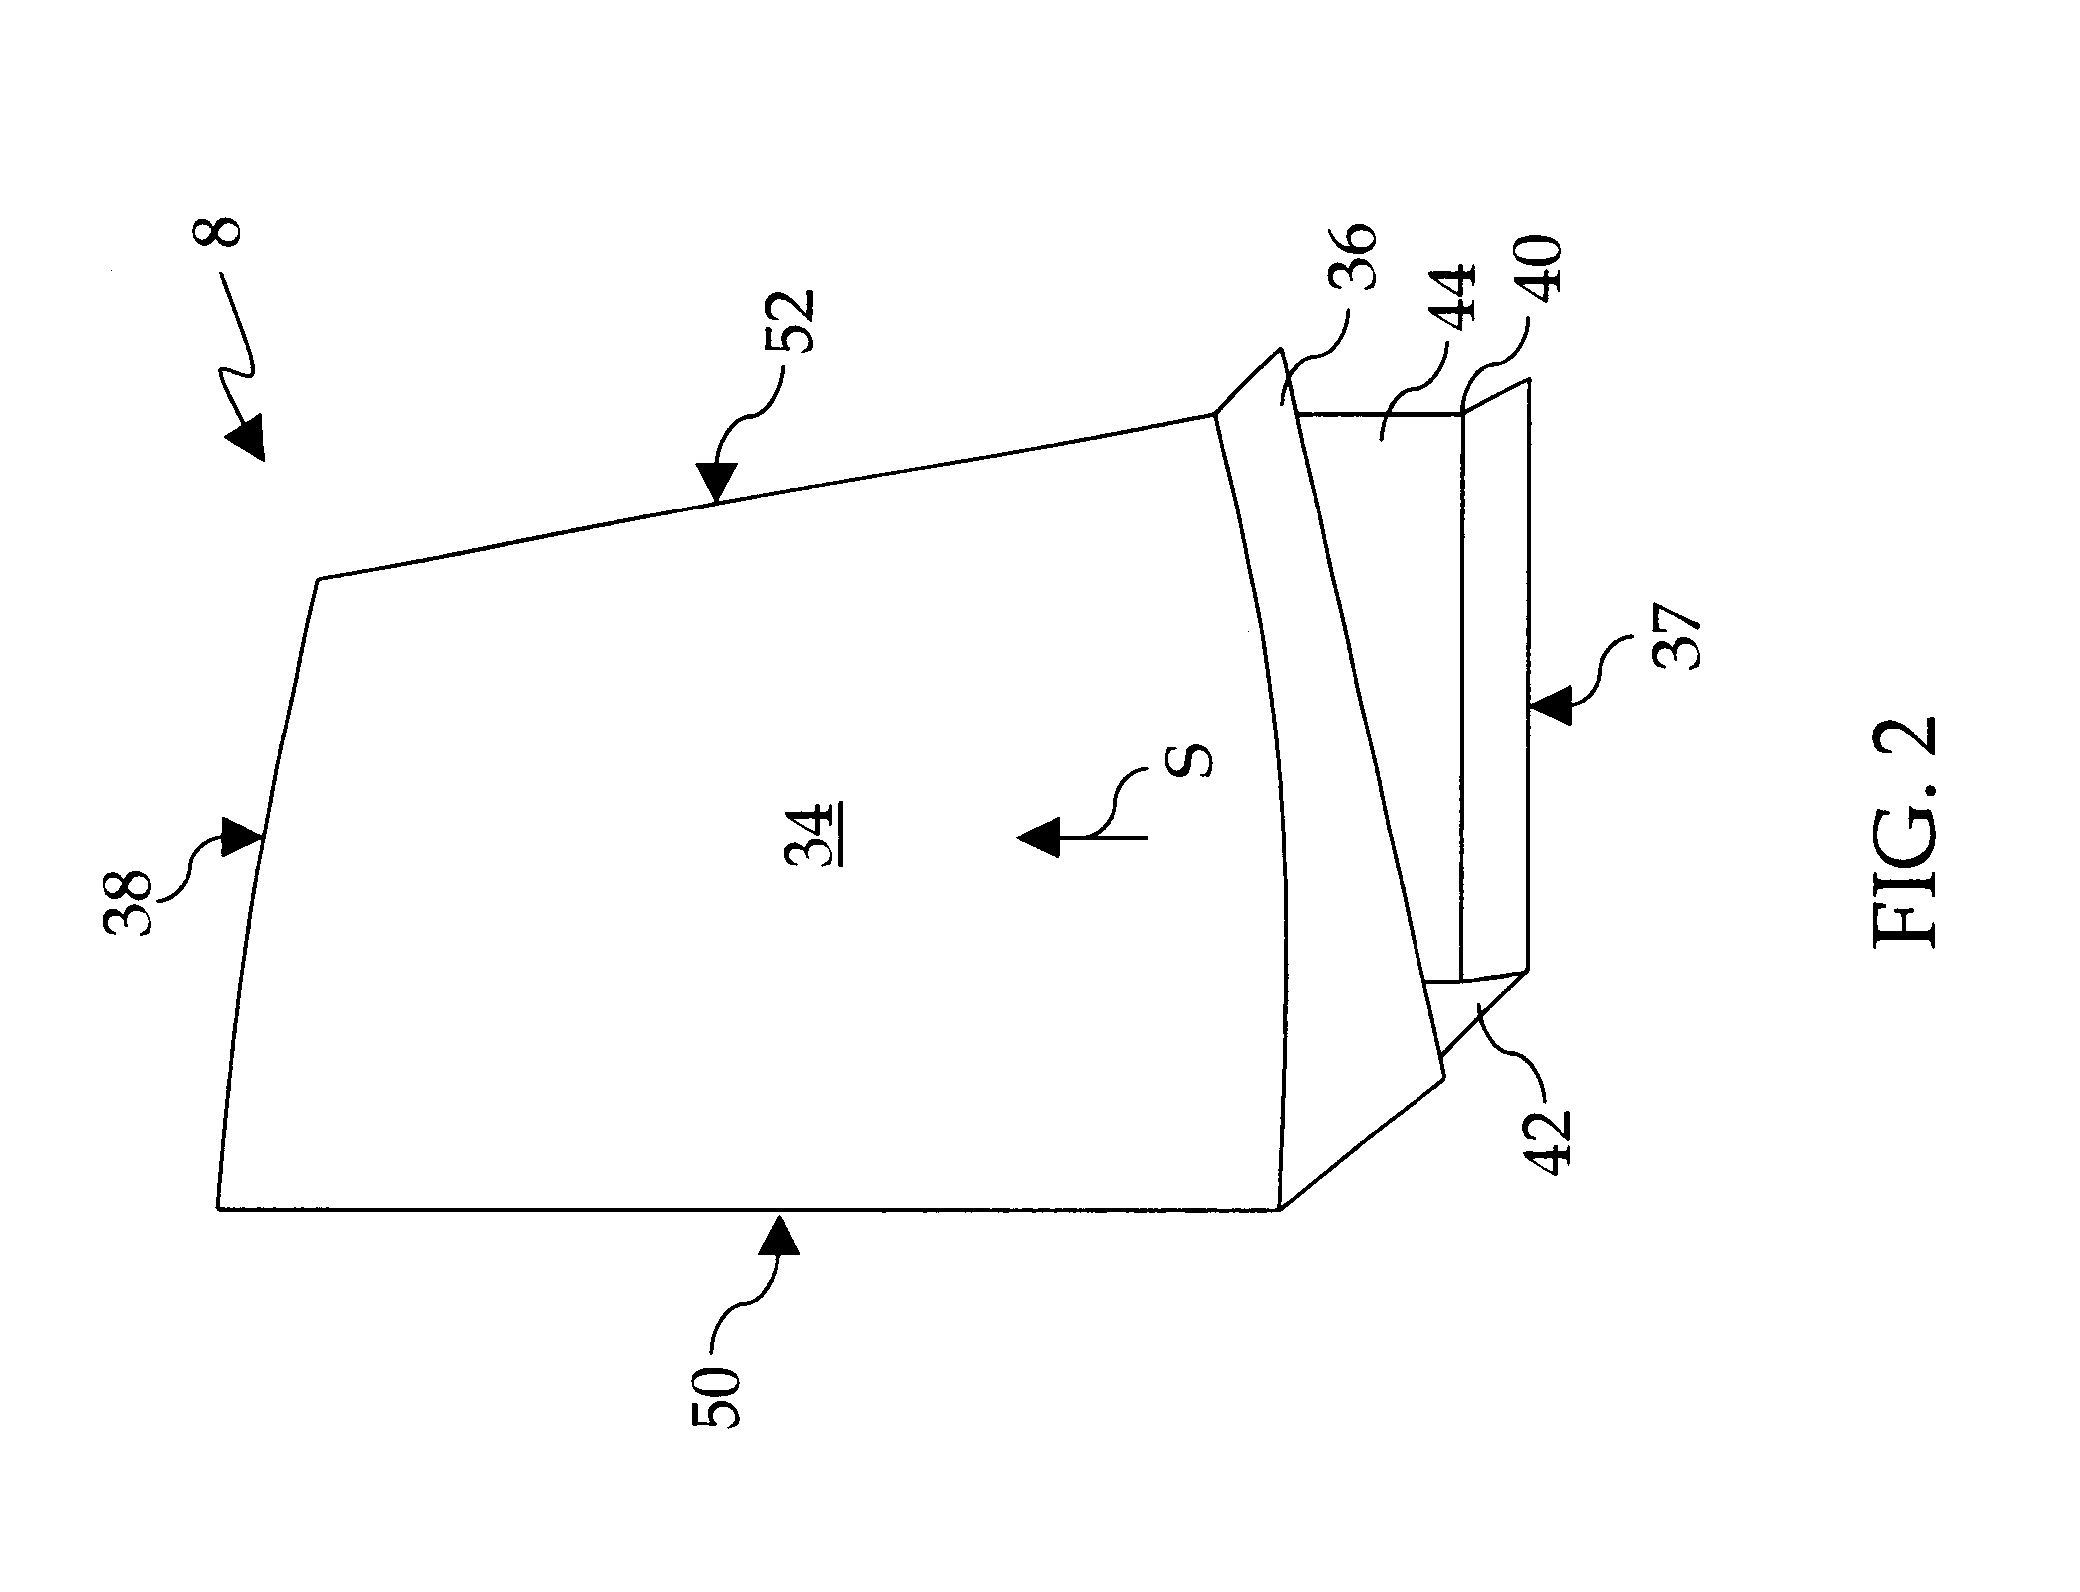 Systems and methods for automated sensing and machining for repairing airfoils of blades